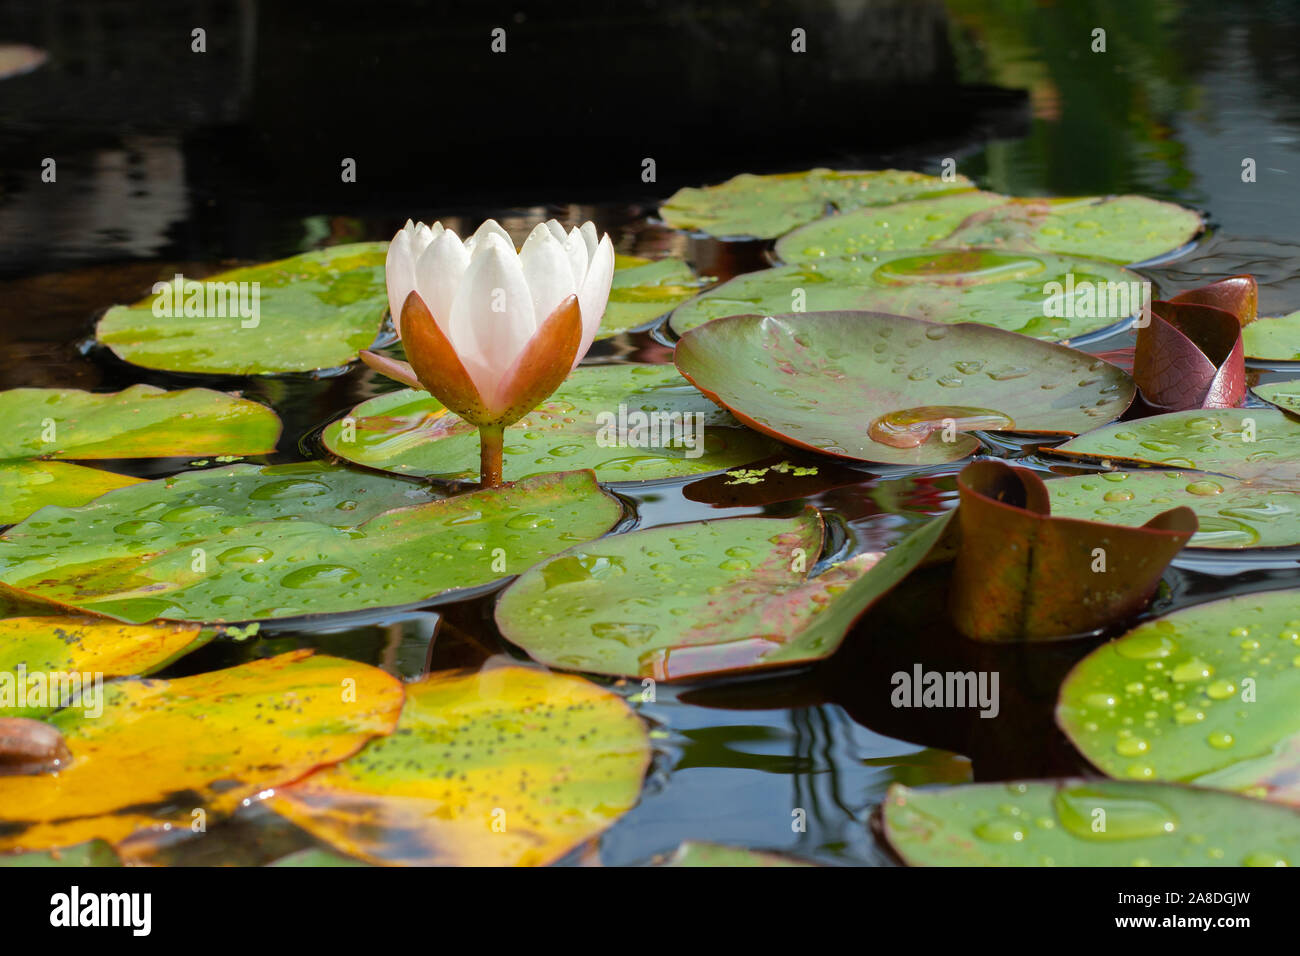 Blooming white lotus, bud of a water lily flower among large green yellow leaves in a pond, water plant lake decoration Stock Photo